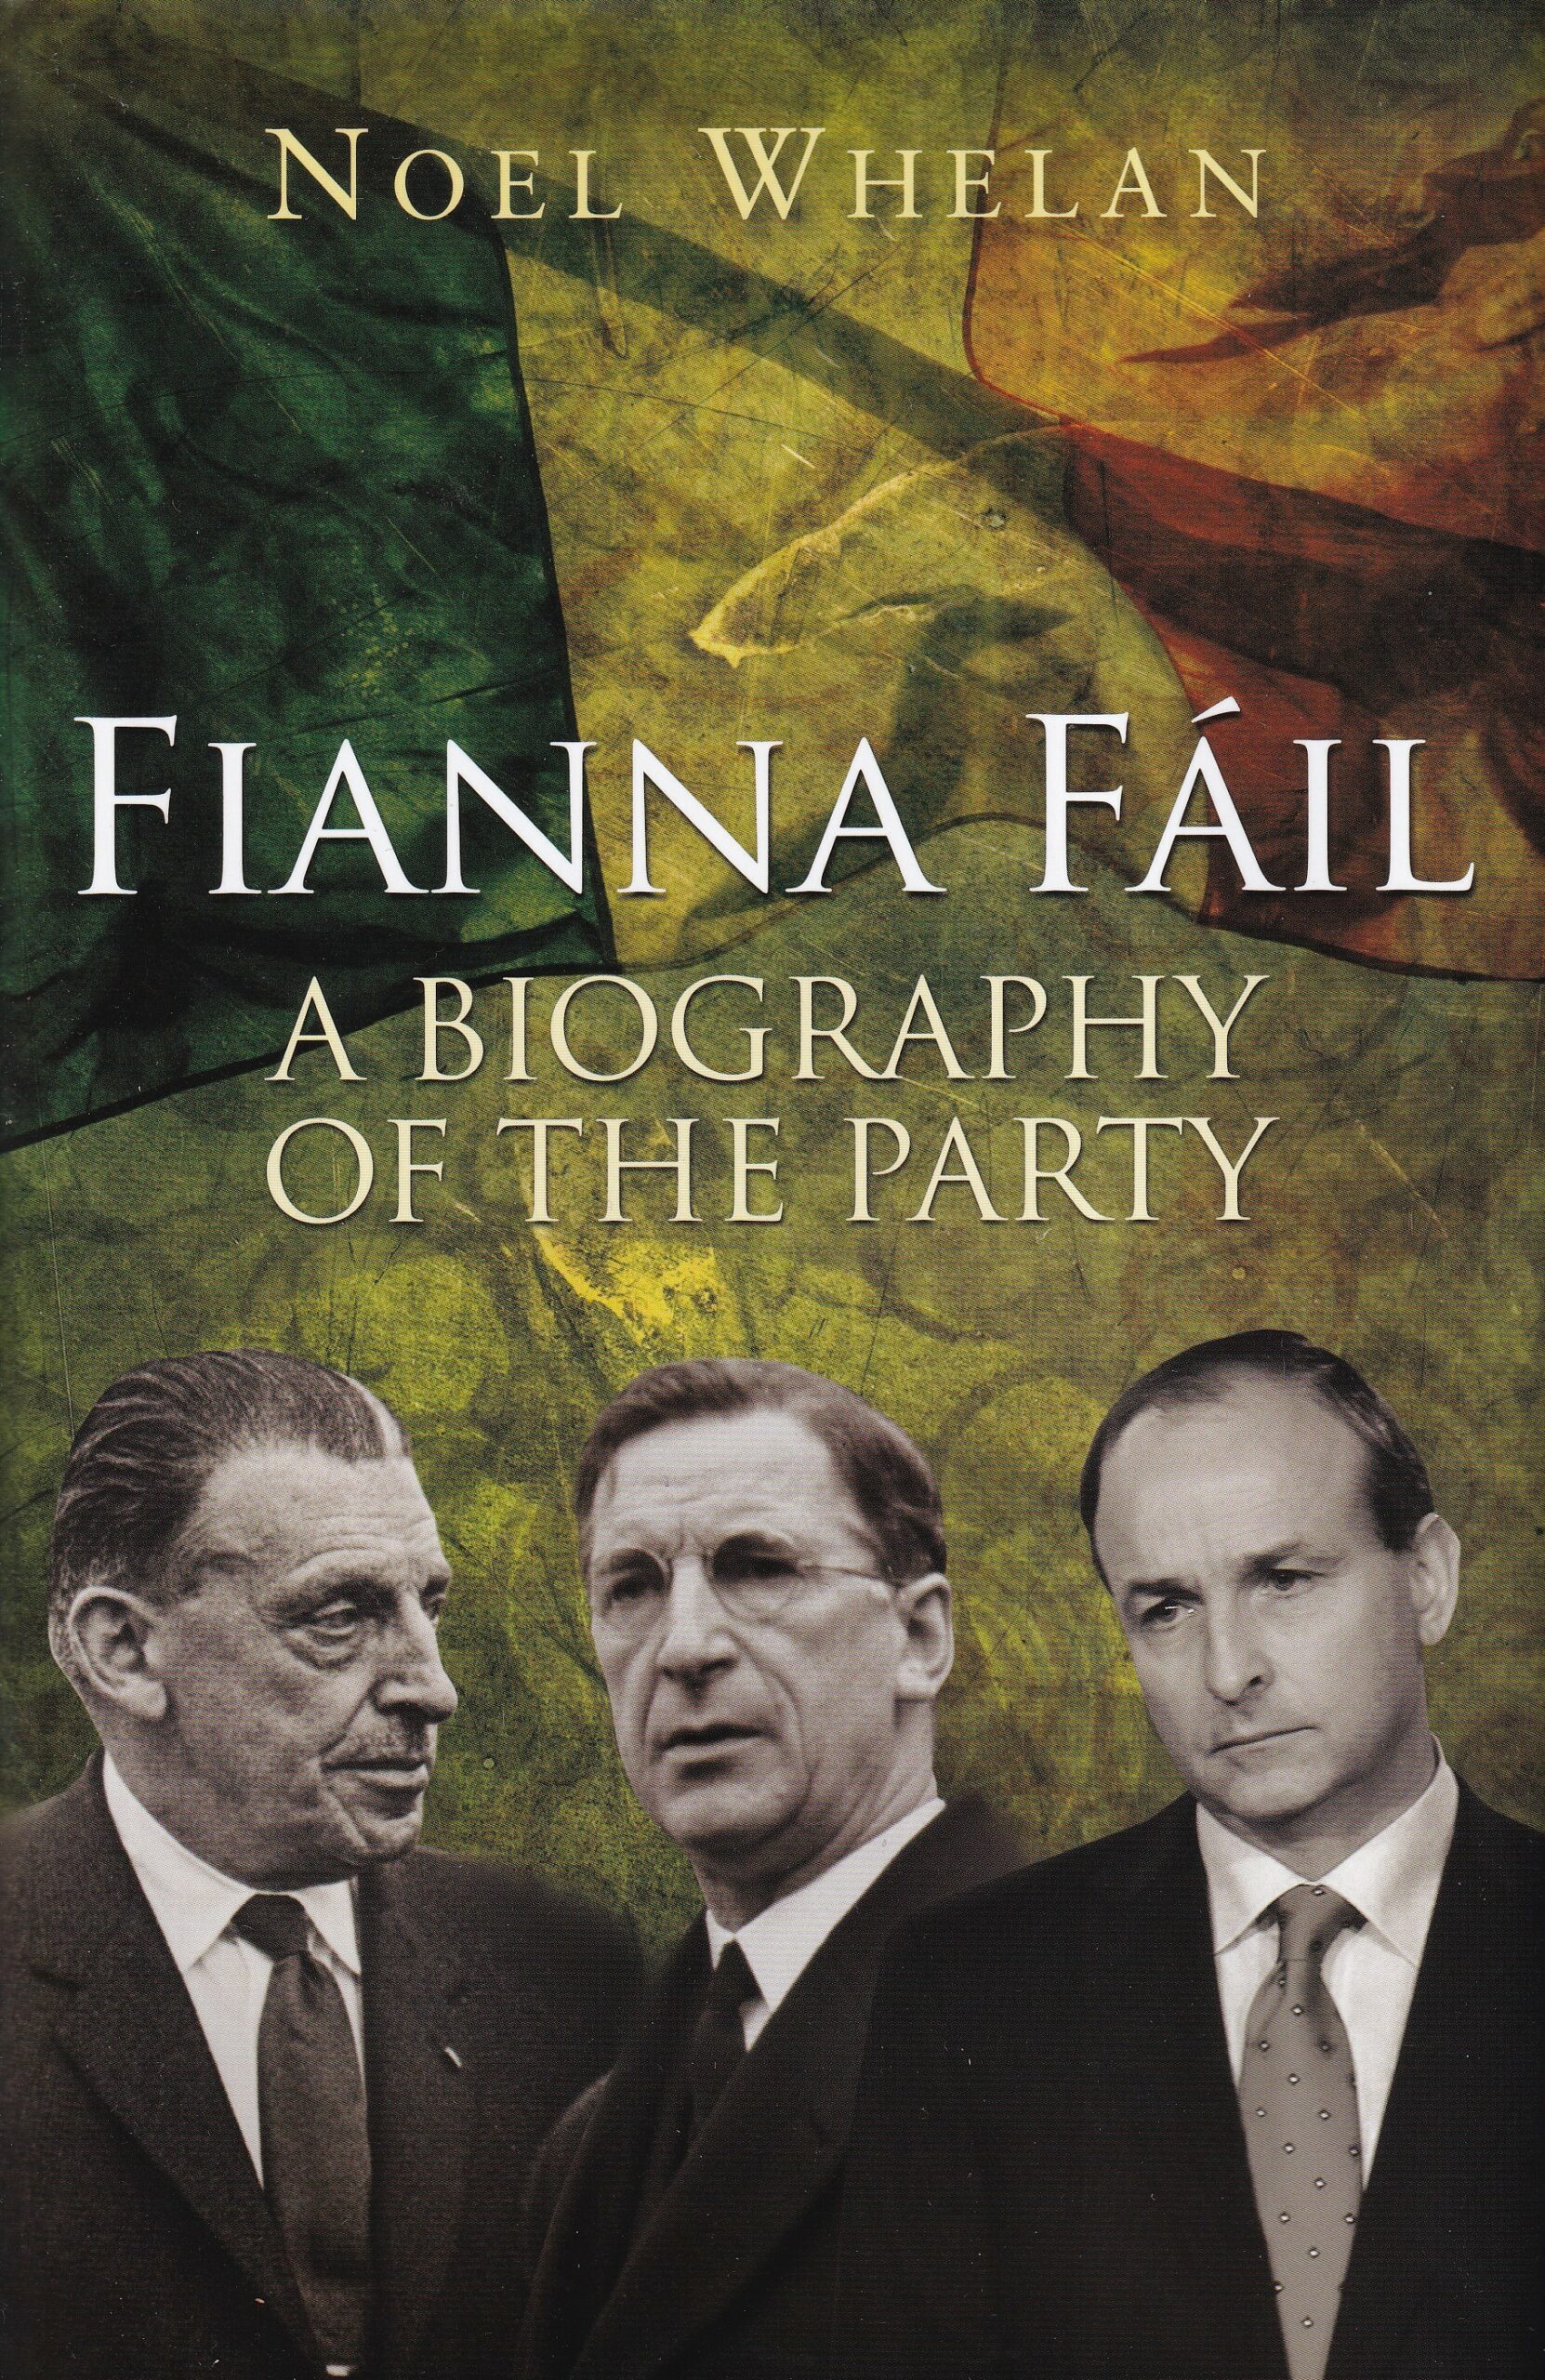 Fianna Fáil: A Biography of the Party by Noel Whelan